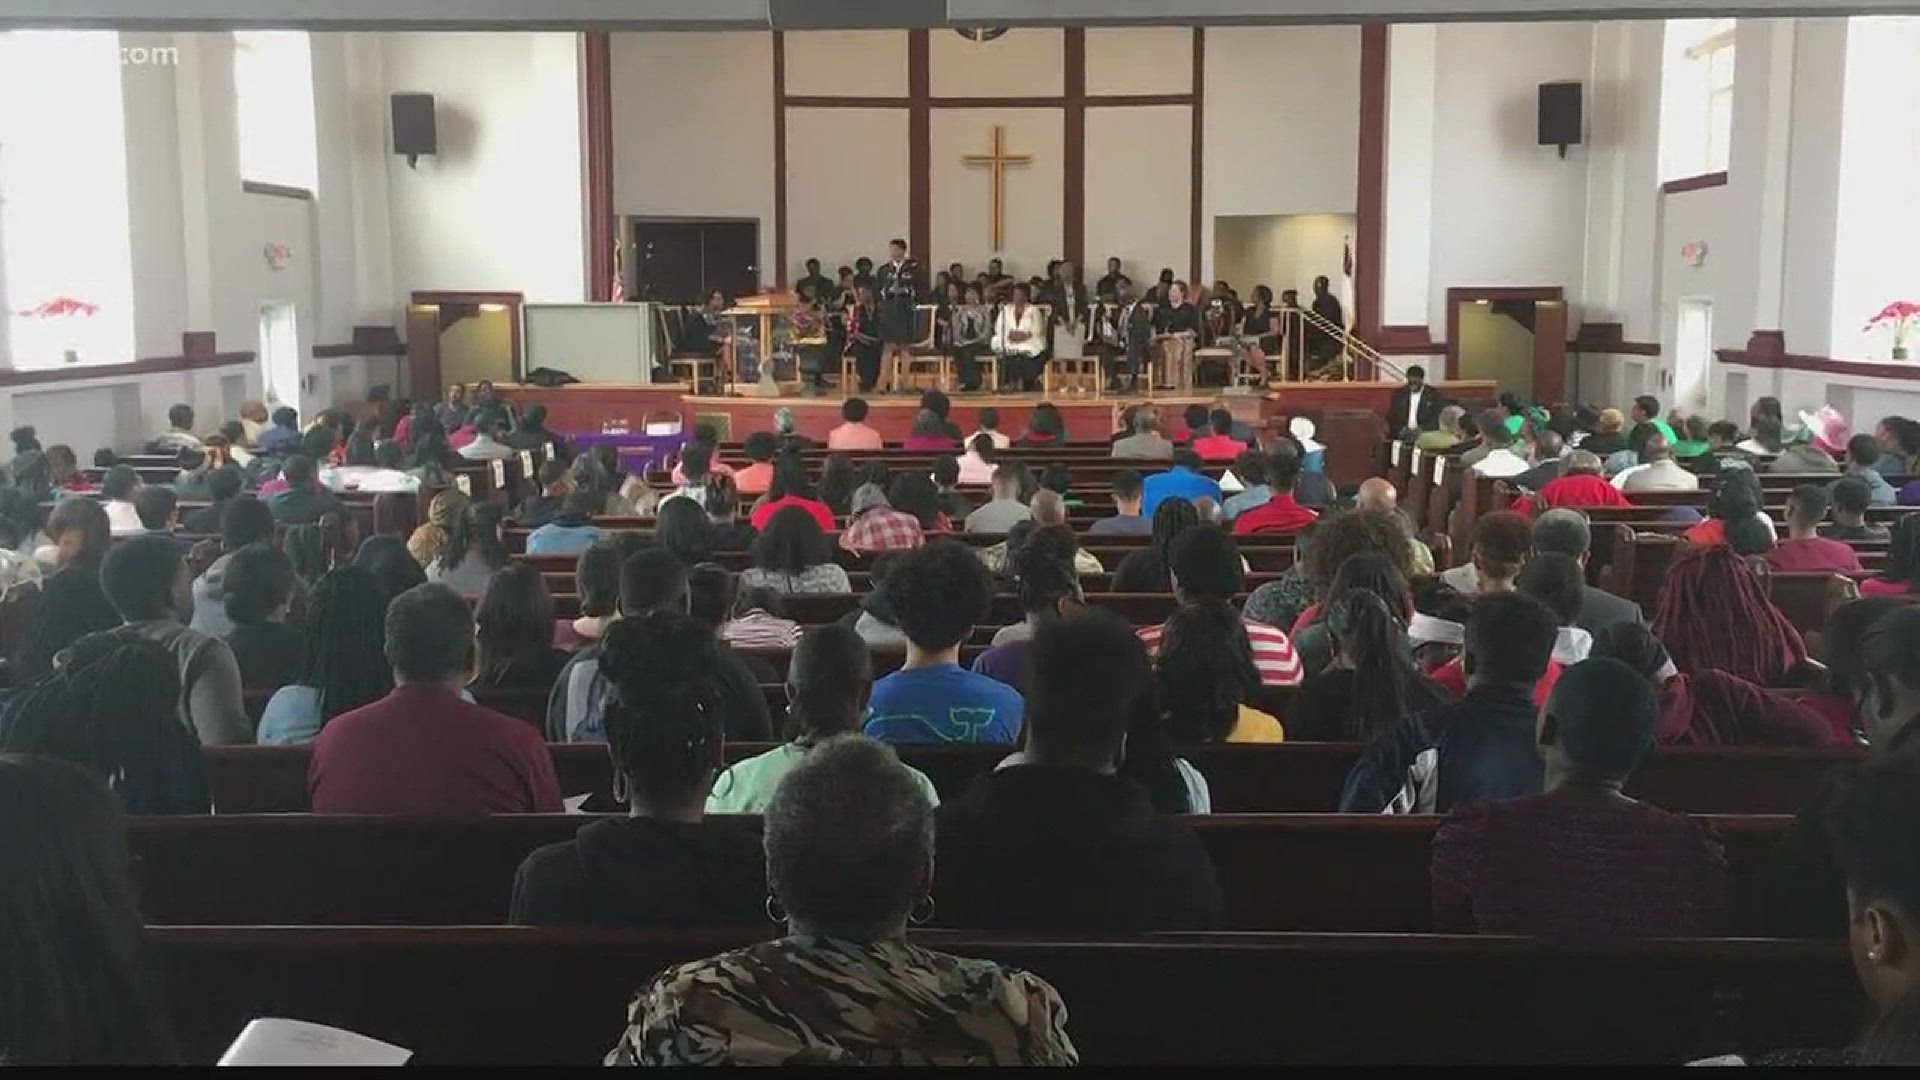 Benedict College held a service today honoring women who make a difference in the community.